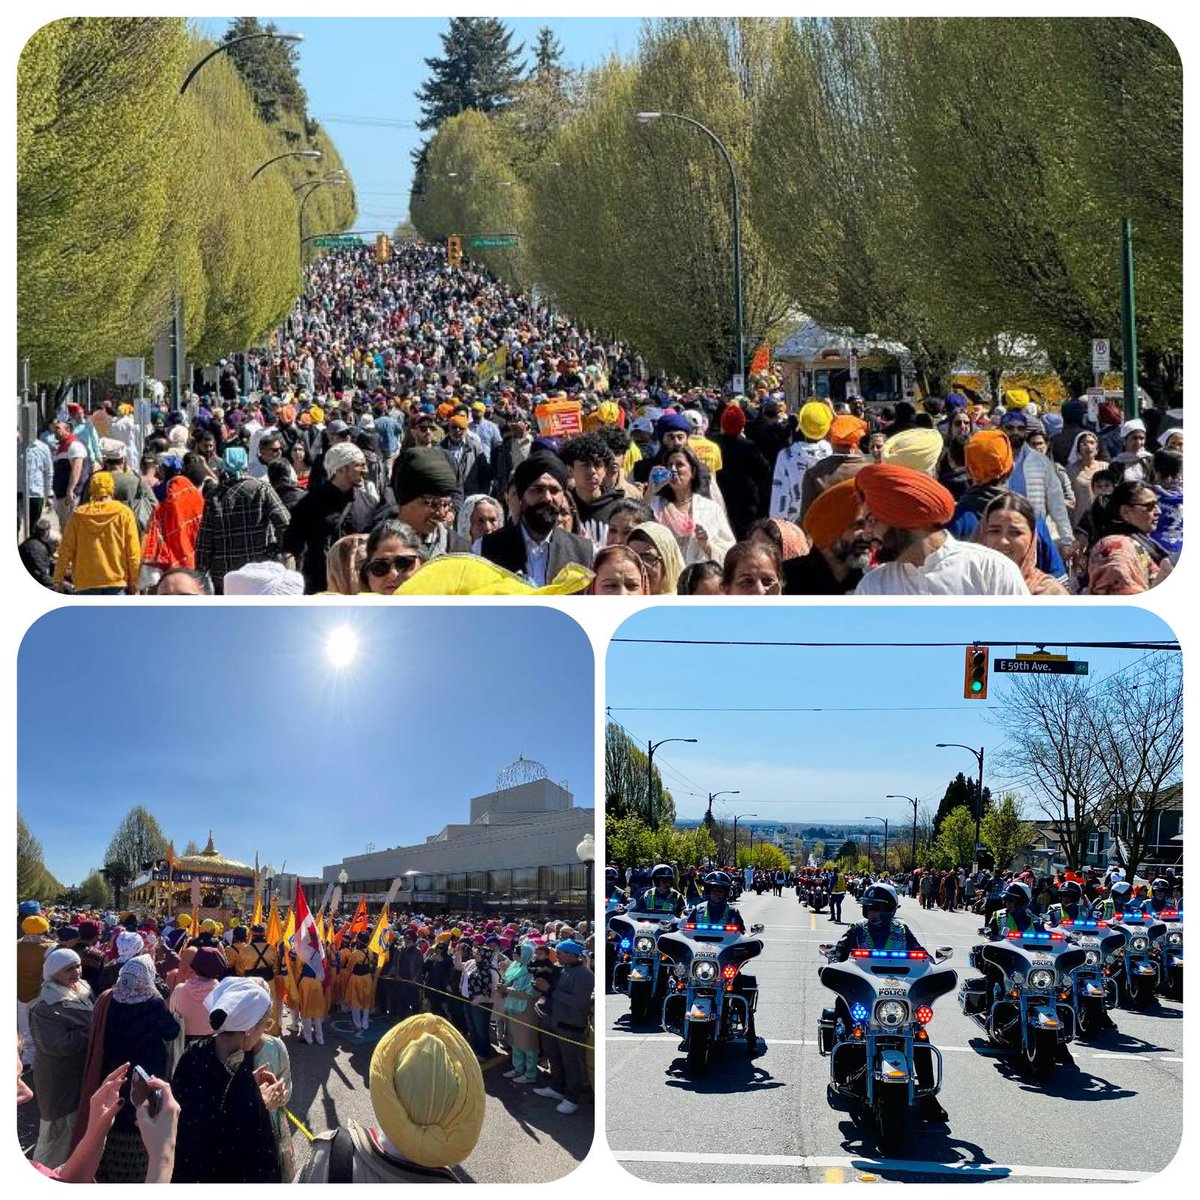 Amazing turnout @kdsross Vaisakhi parade @CityofVancouver @punjabimarket. Great to see all the @VancouverPD officers @VPDTrafficUnit @VPDCommunity Volunteers @VPDCadets and @VPDPipeBand out to support. Happy Vaisakhi! #Vaisakhi2024